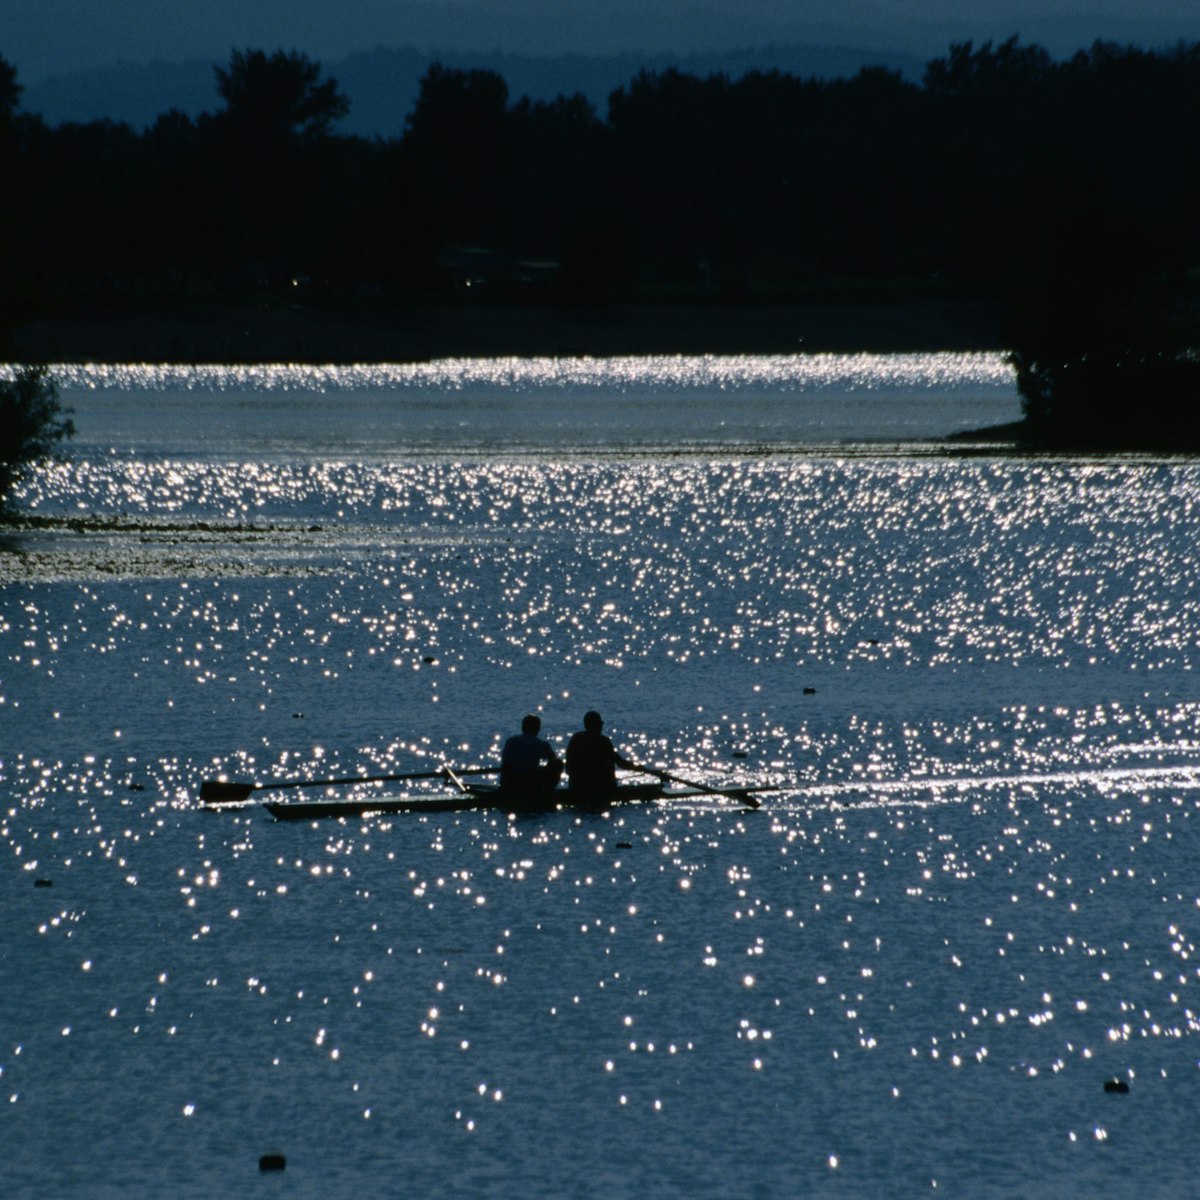 Two rowers propelling their craft through the sun-dappled waters of Jarun Lake.